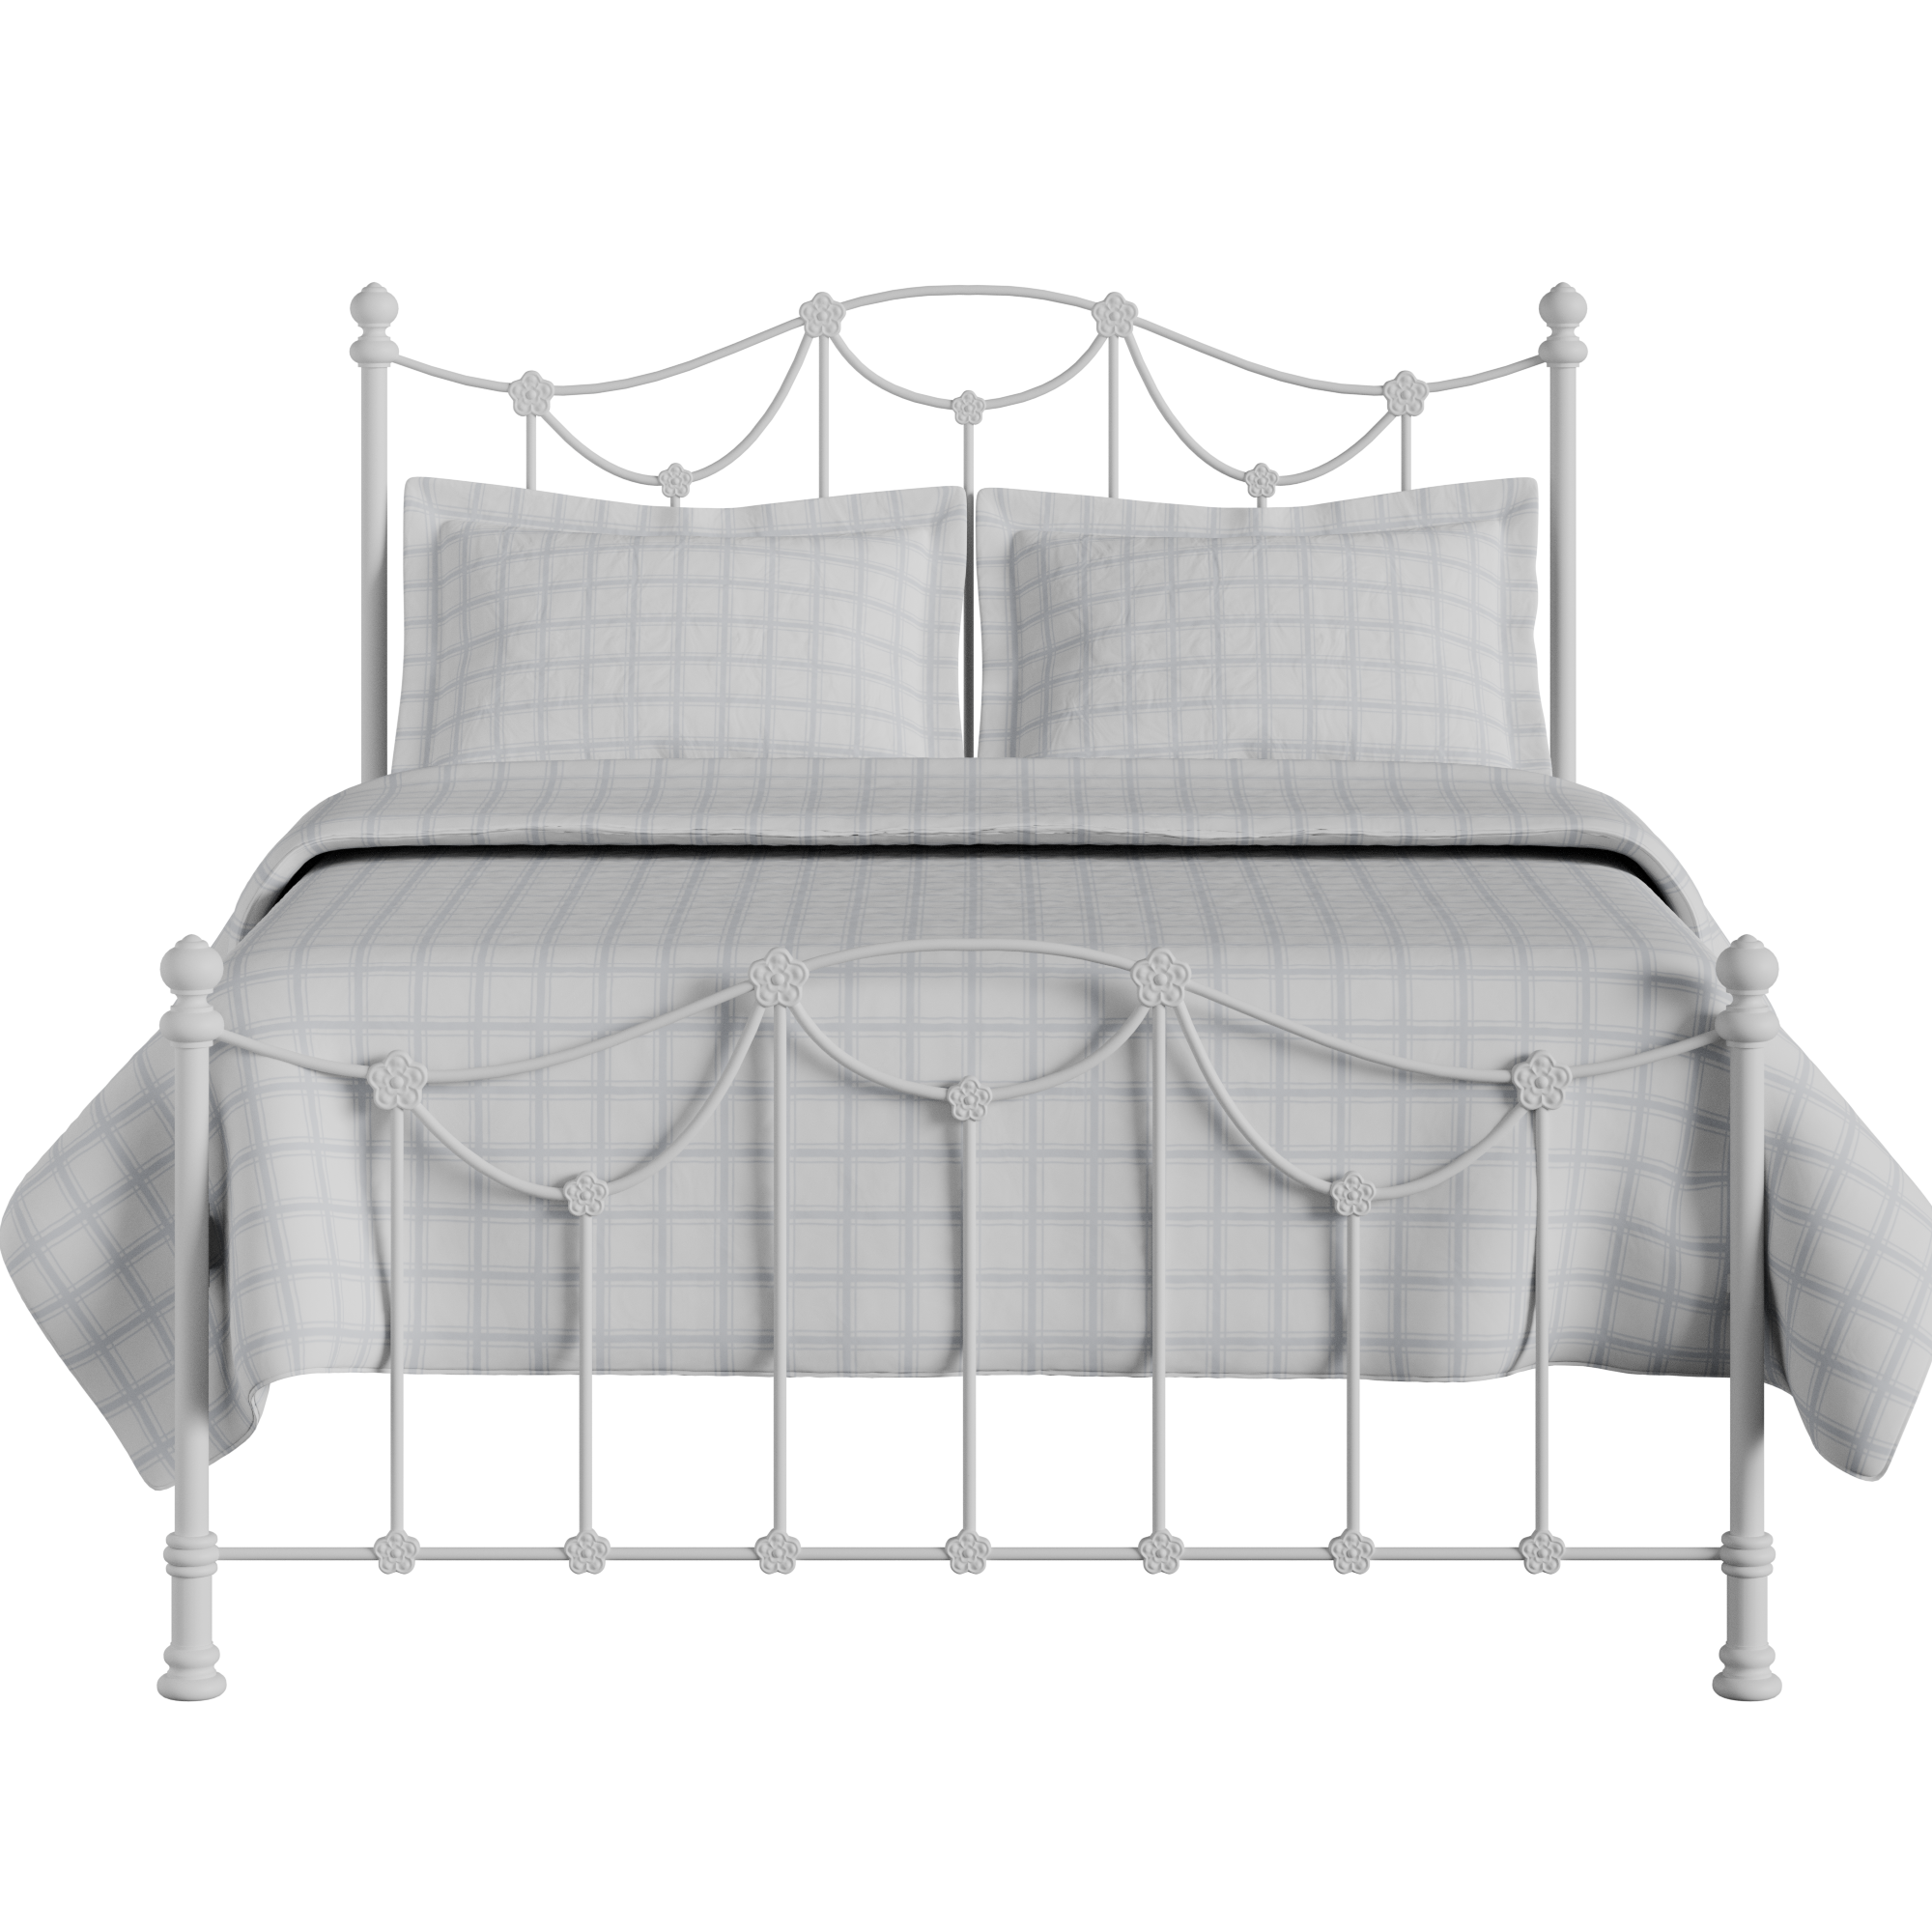 Carie Low Footend iron/metal bed in white